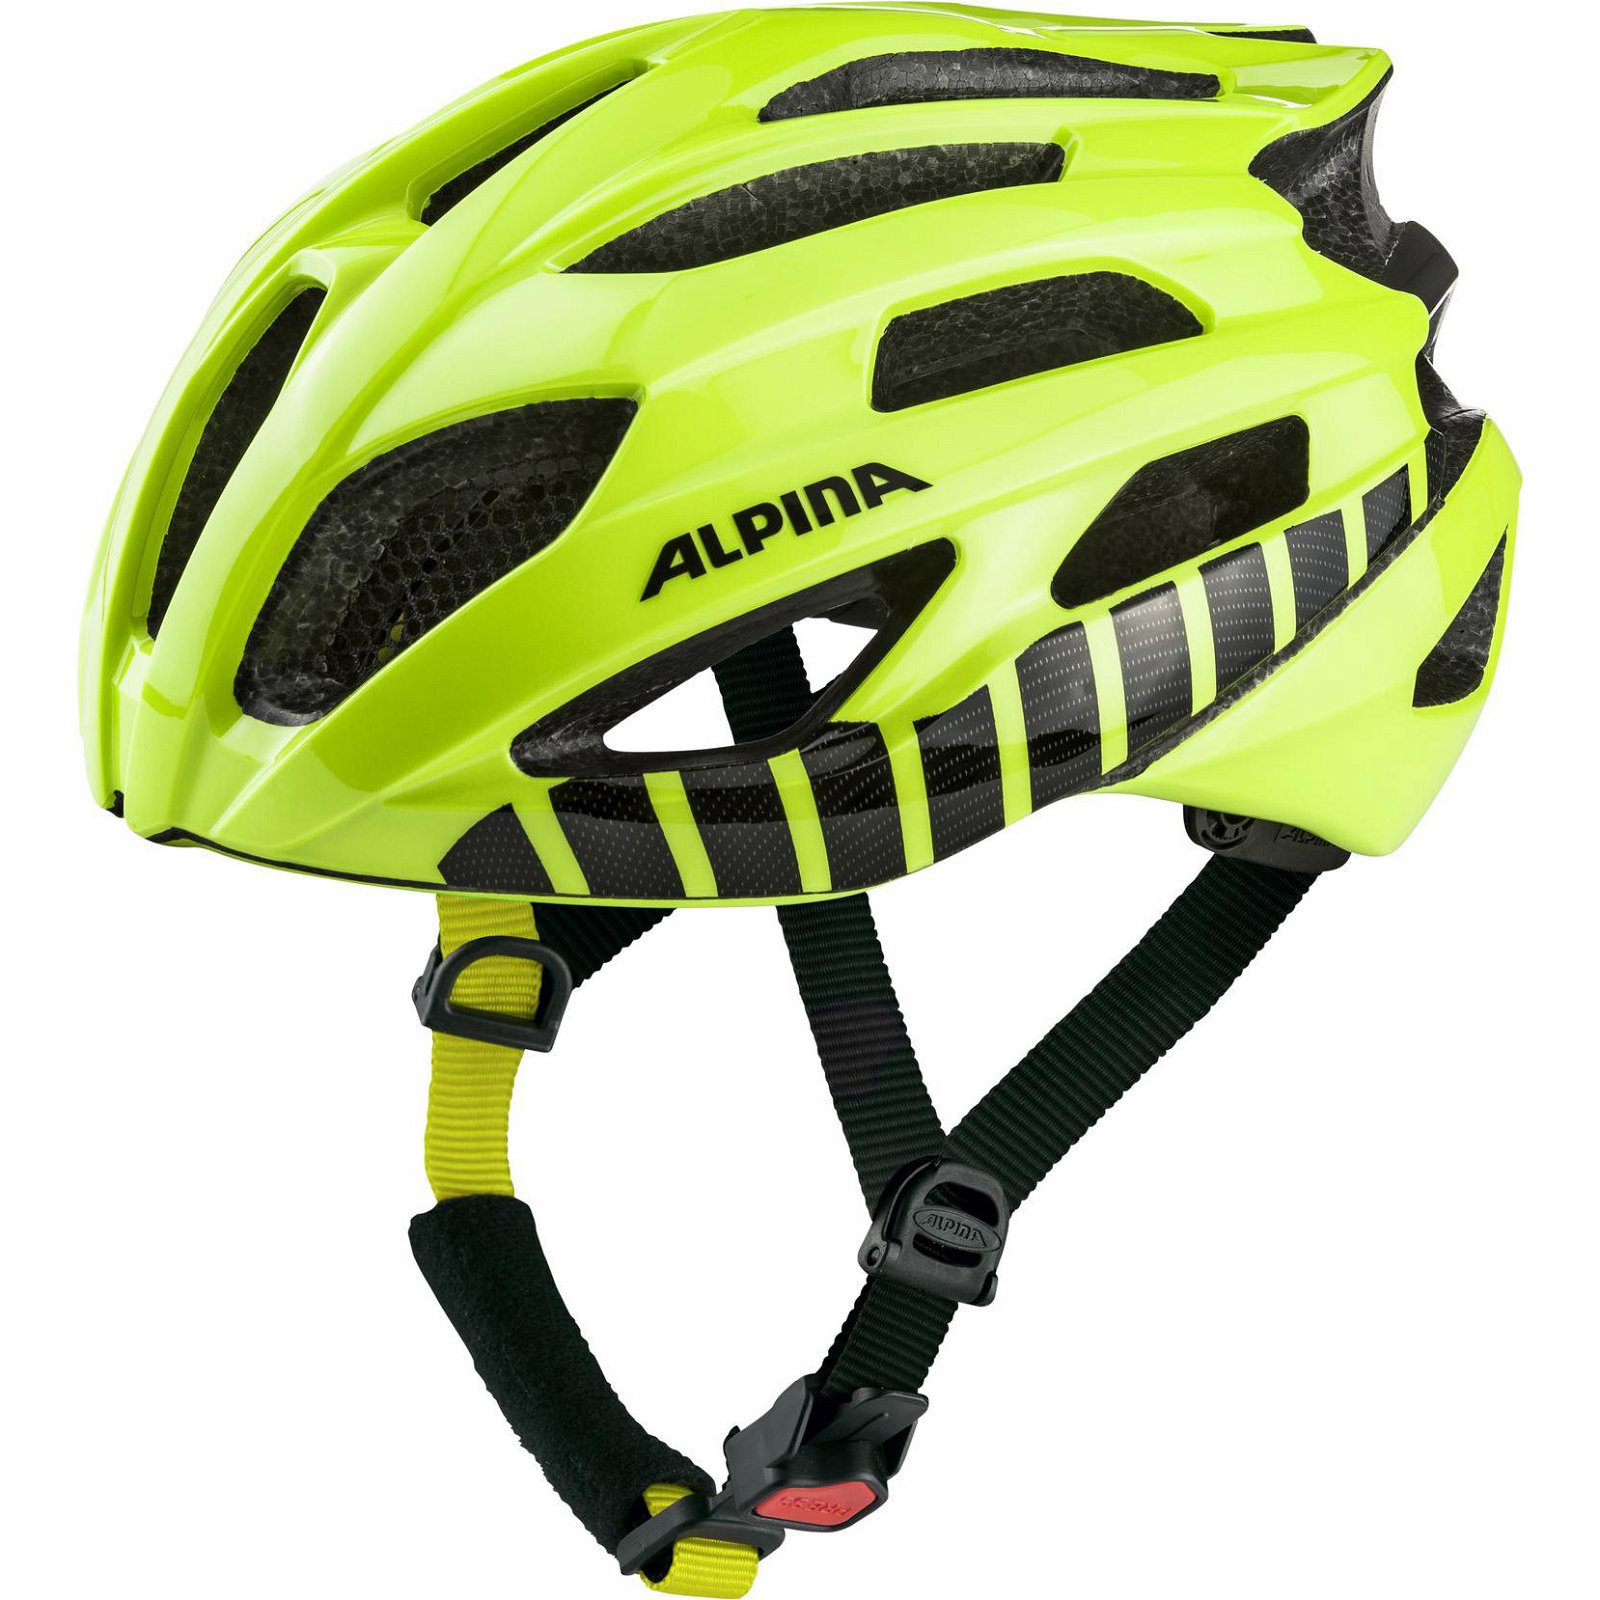 Alpina helm Fedaia be visible 53-58cm